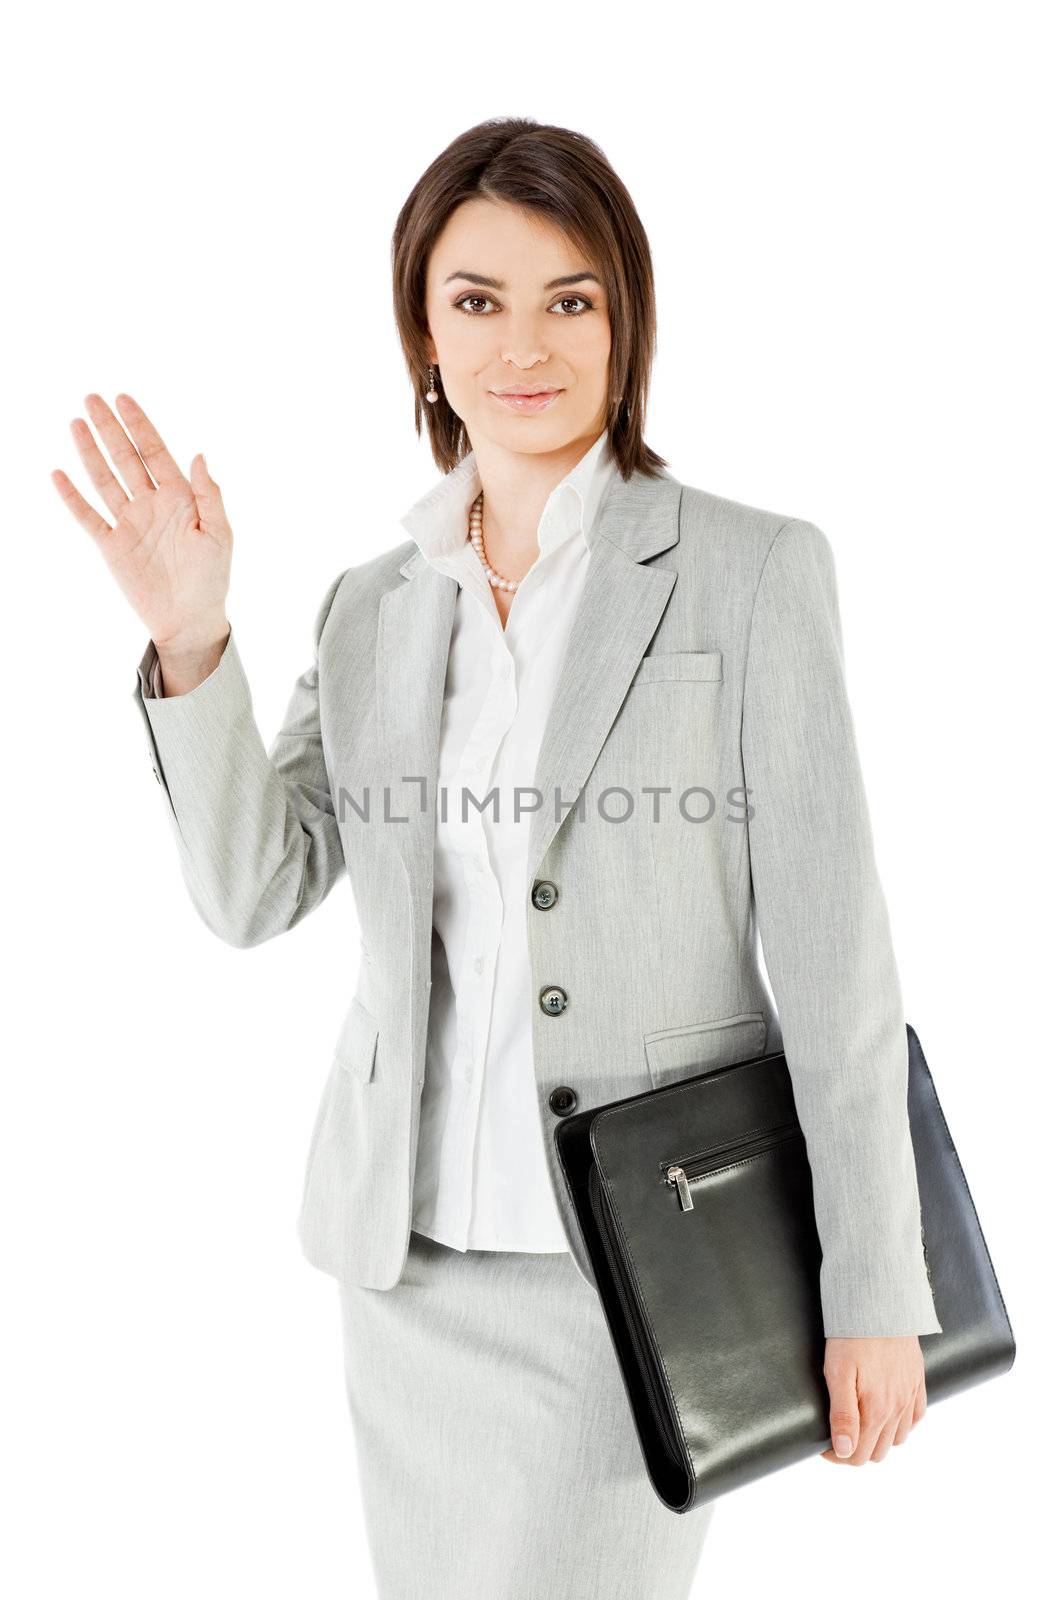 Smiling businesswoman on white background, holding briefcase waving